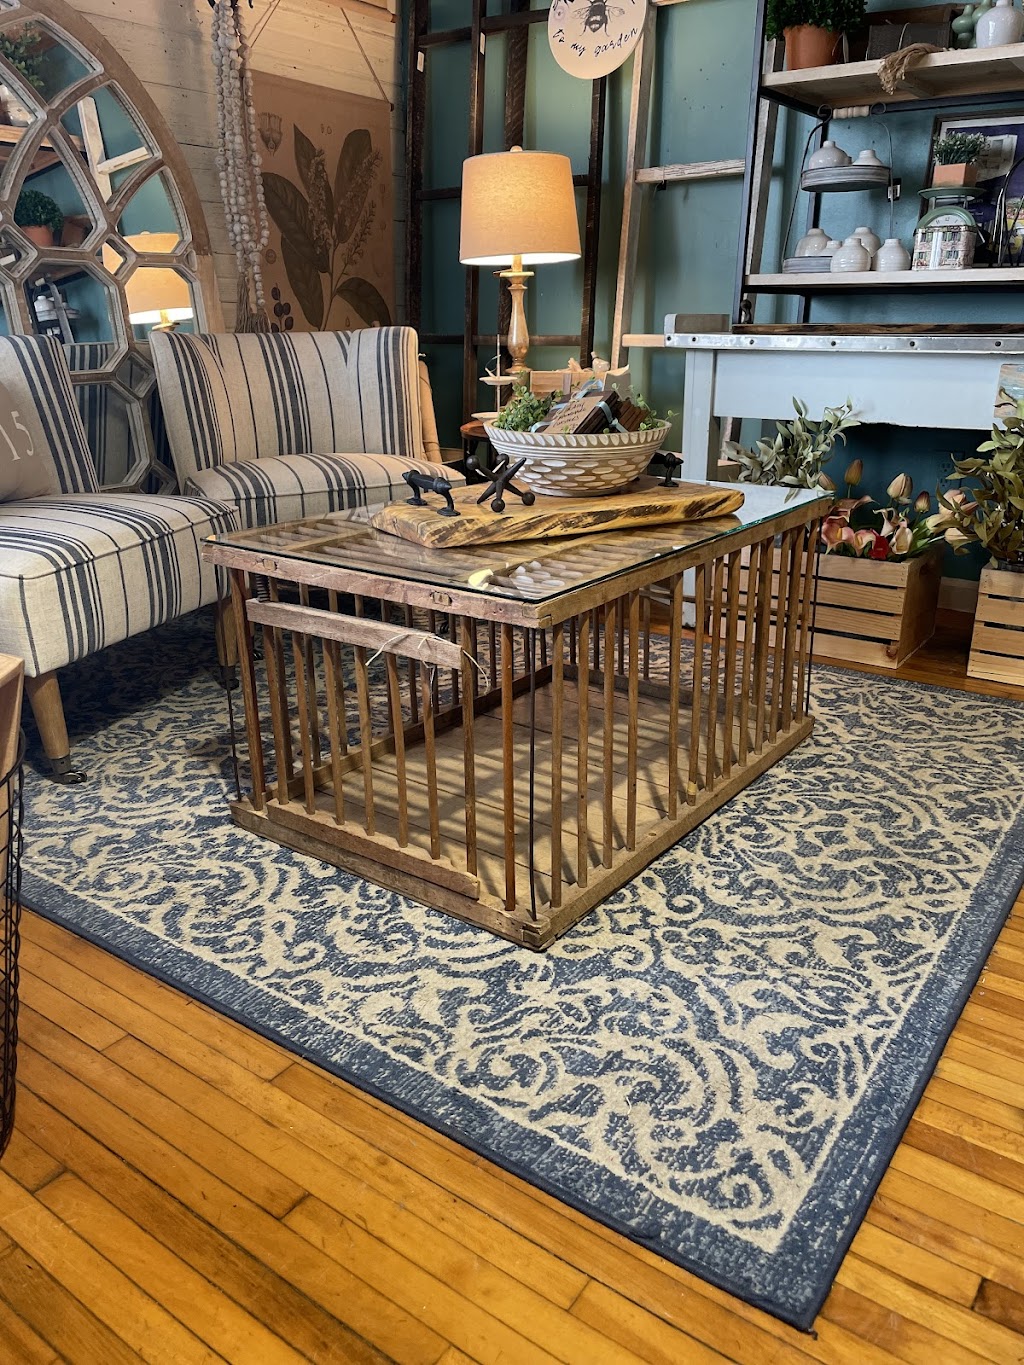 woodgate home store | 1520 Lewis Center Rd, Lewis Center, OH 43035, USA | Phone: (740) 953-3977